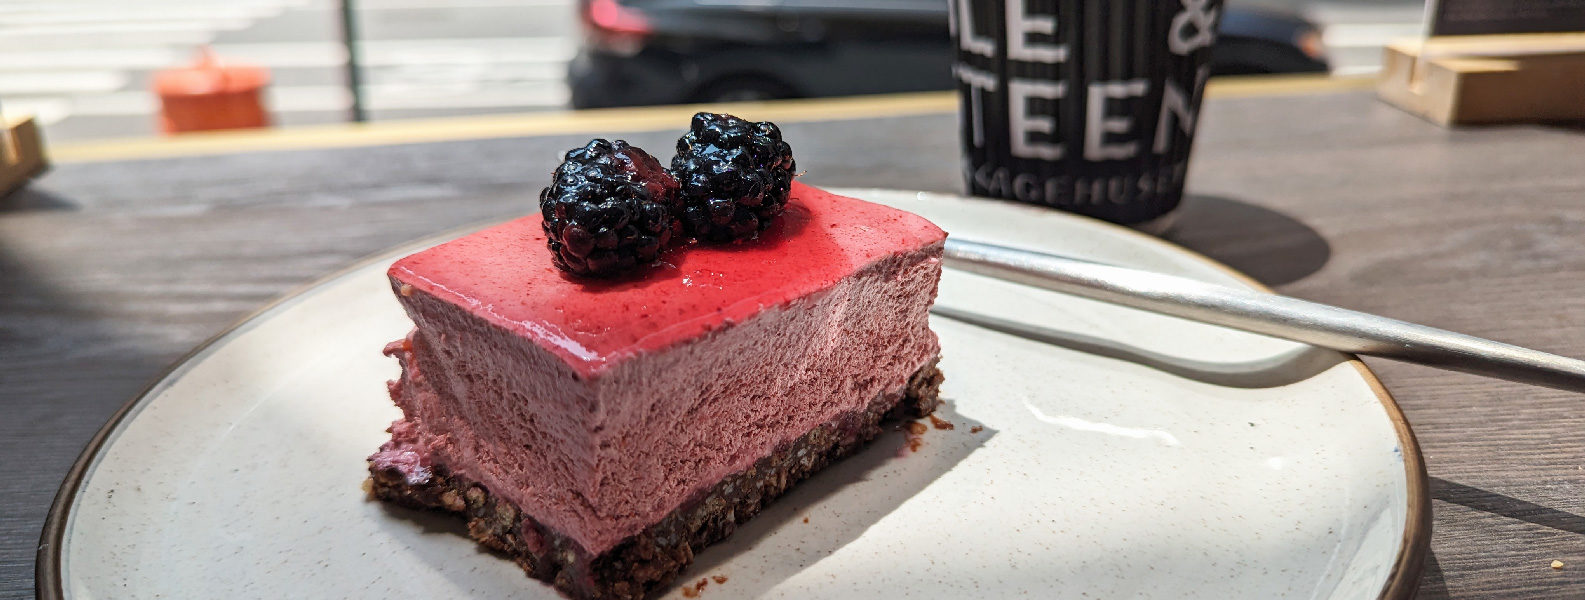 Best Vegan Desserts in NYC You Don’t Want to Miss